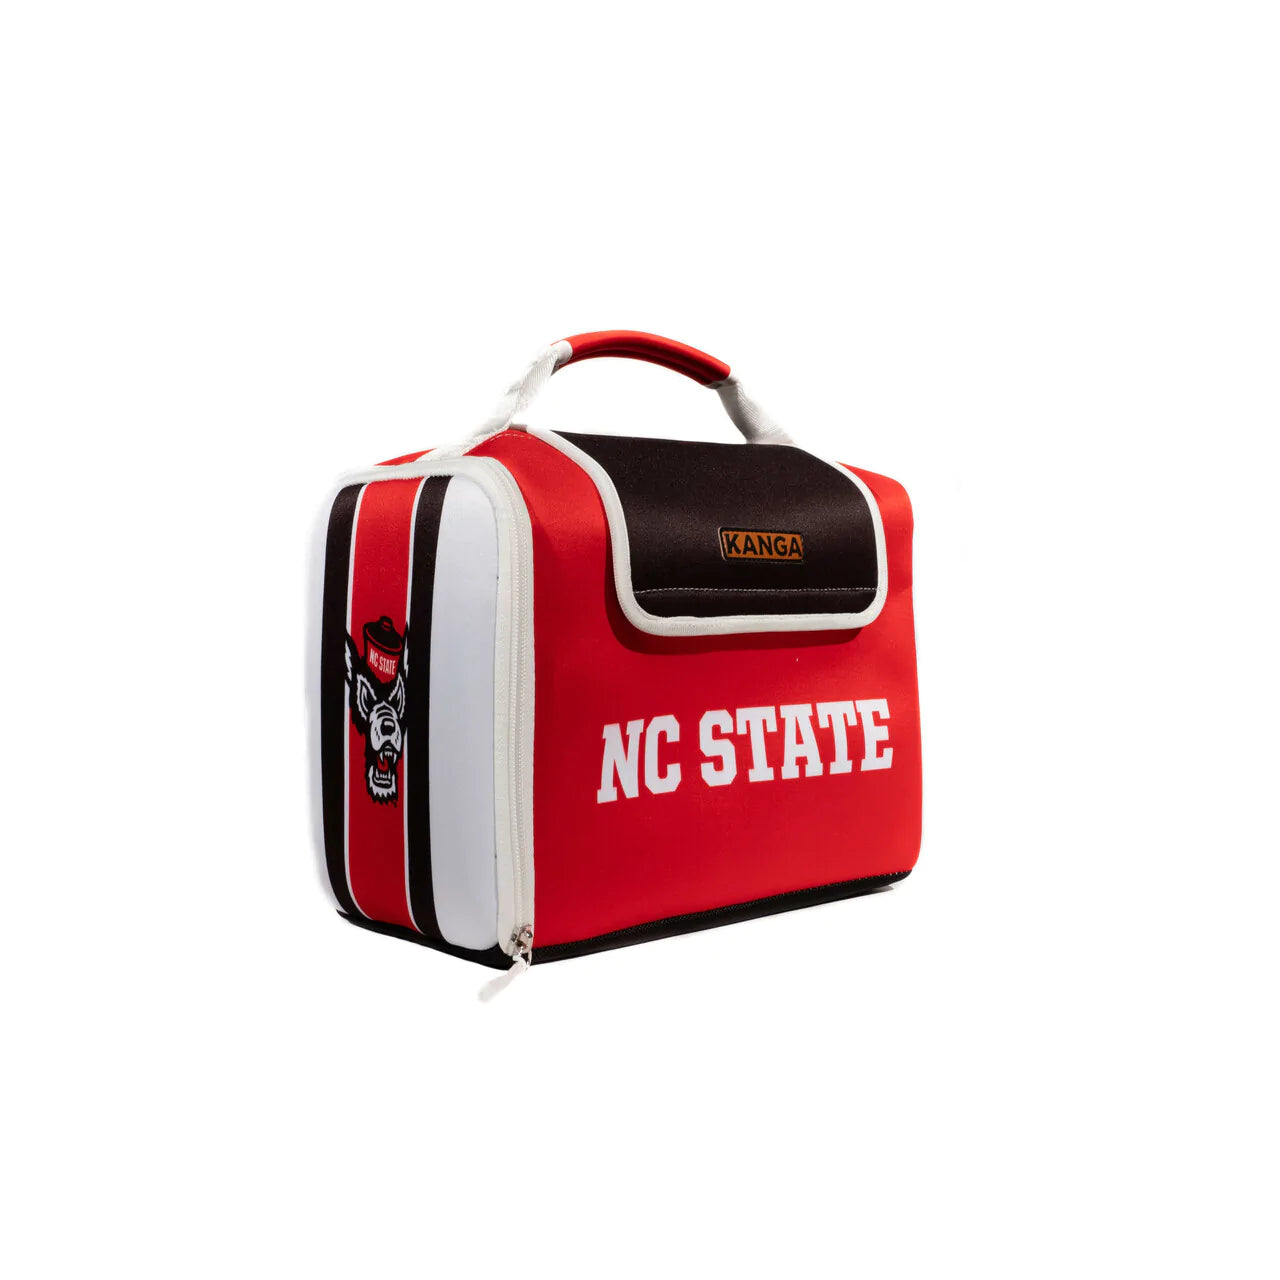 KASE MATE 12 PACK - NC STATE